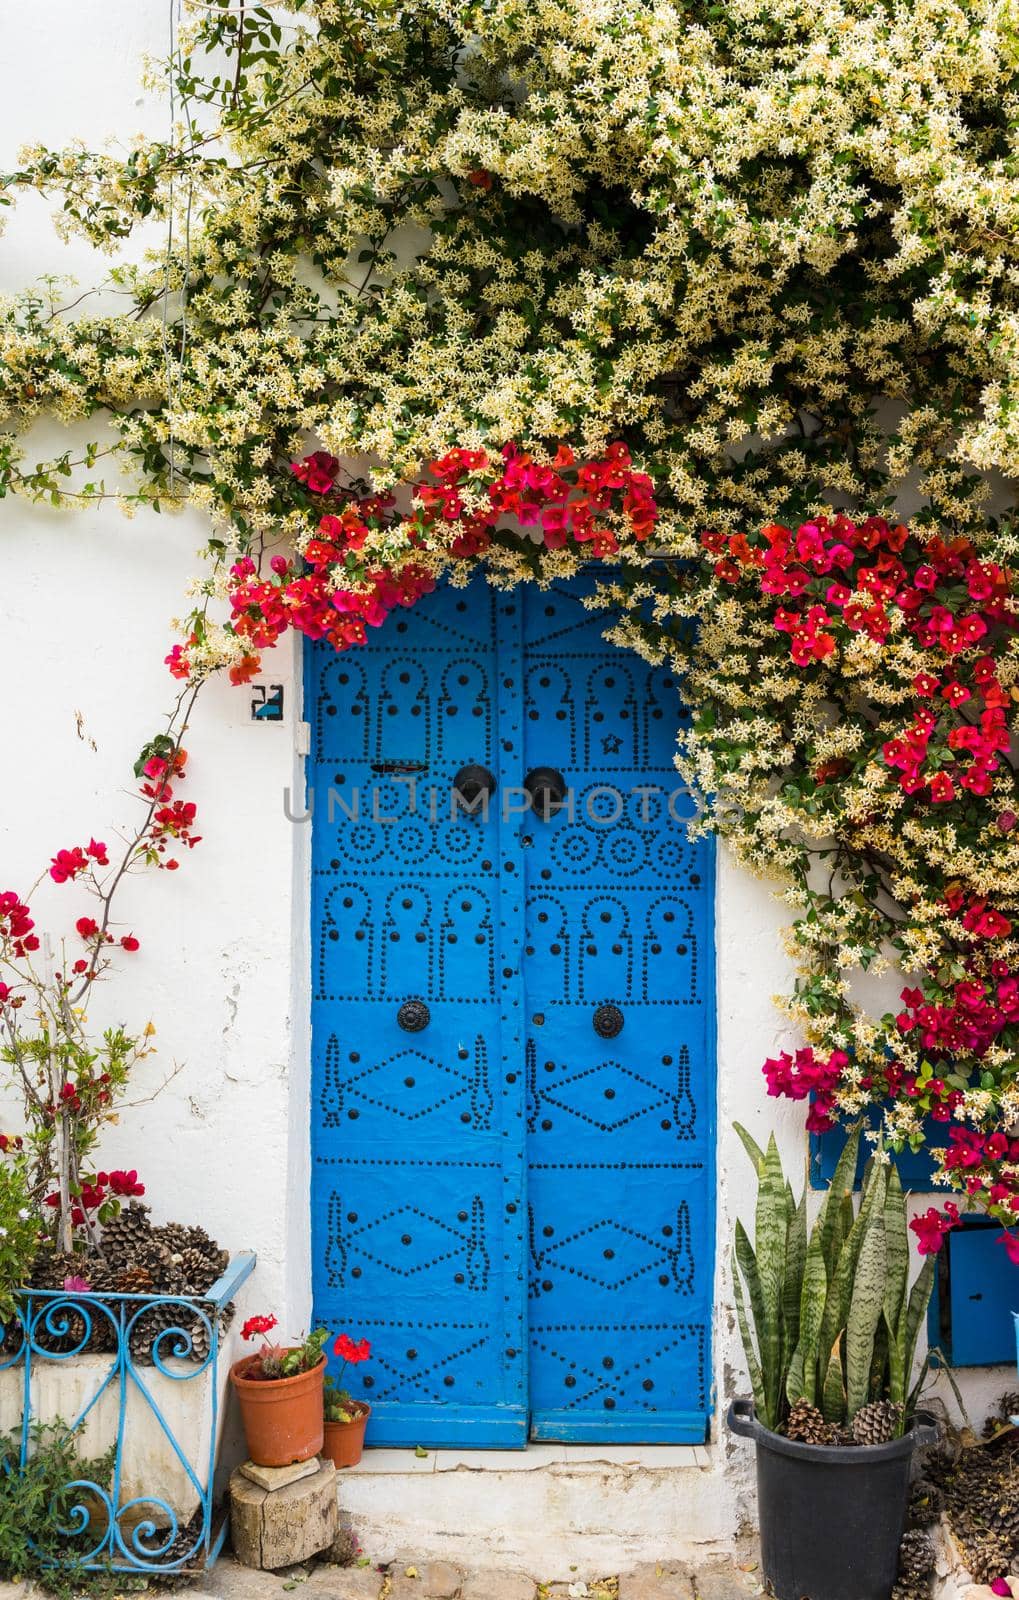 Blue door with traditional ornament as symbol of Sidi Bou Said and flowers